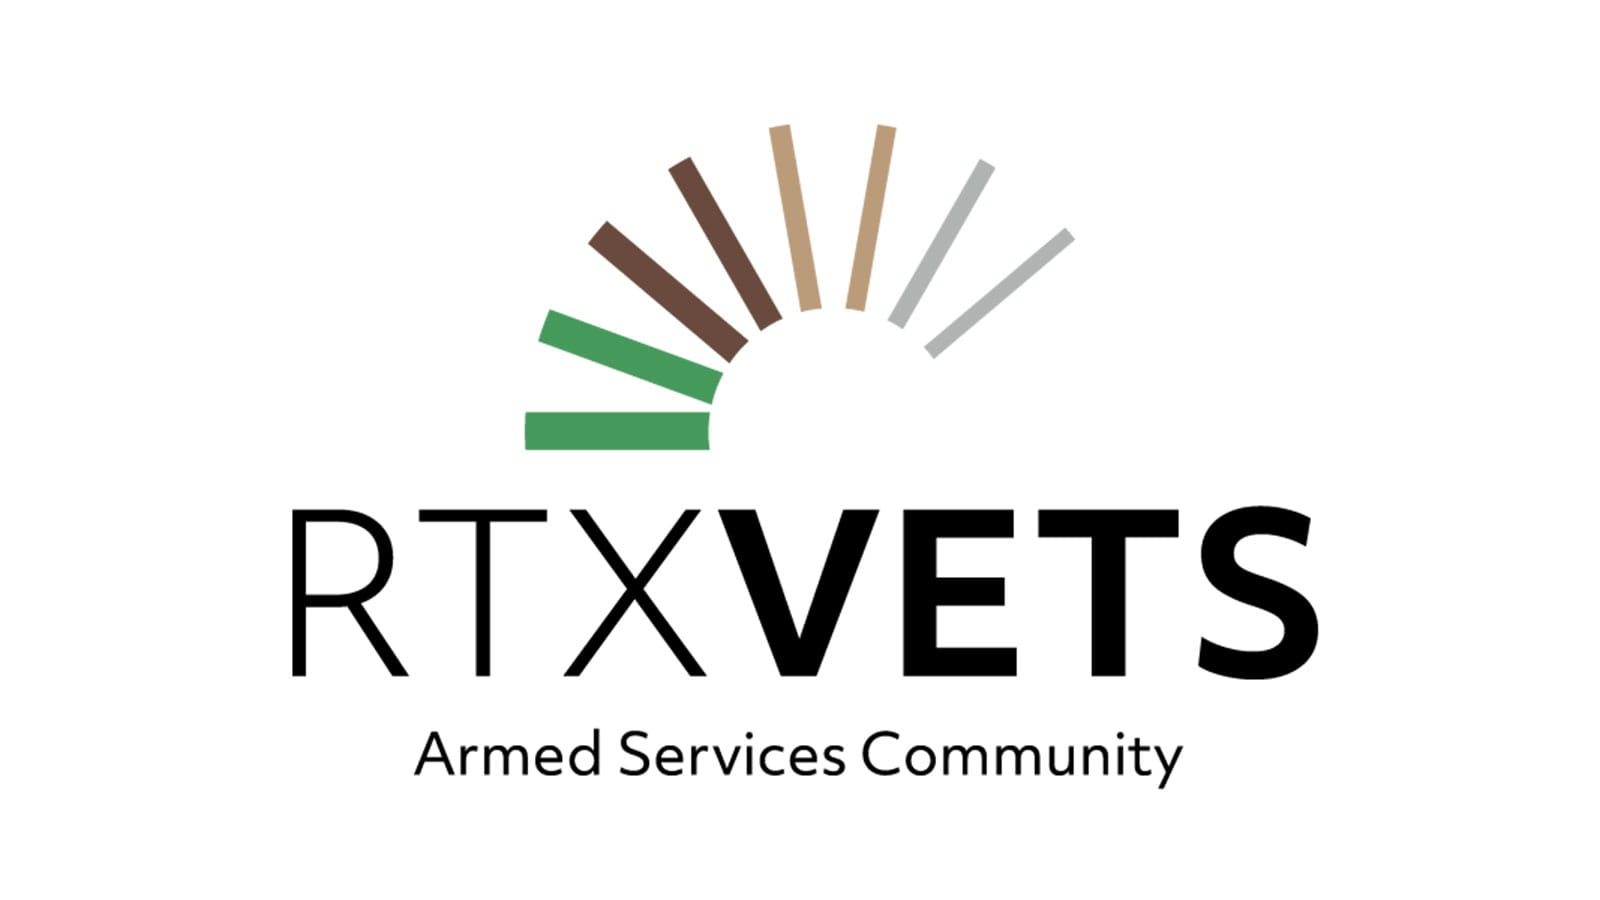 RTXVETS armed services community